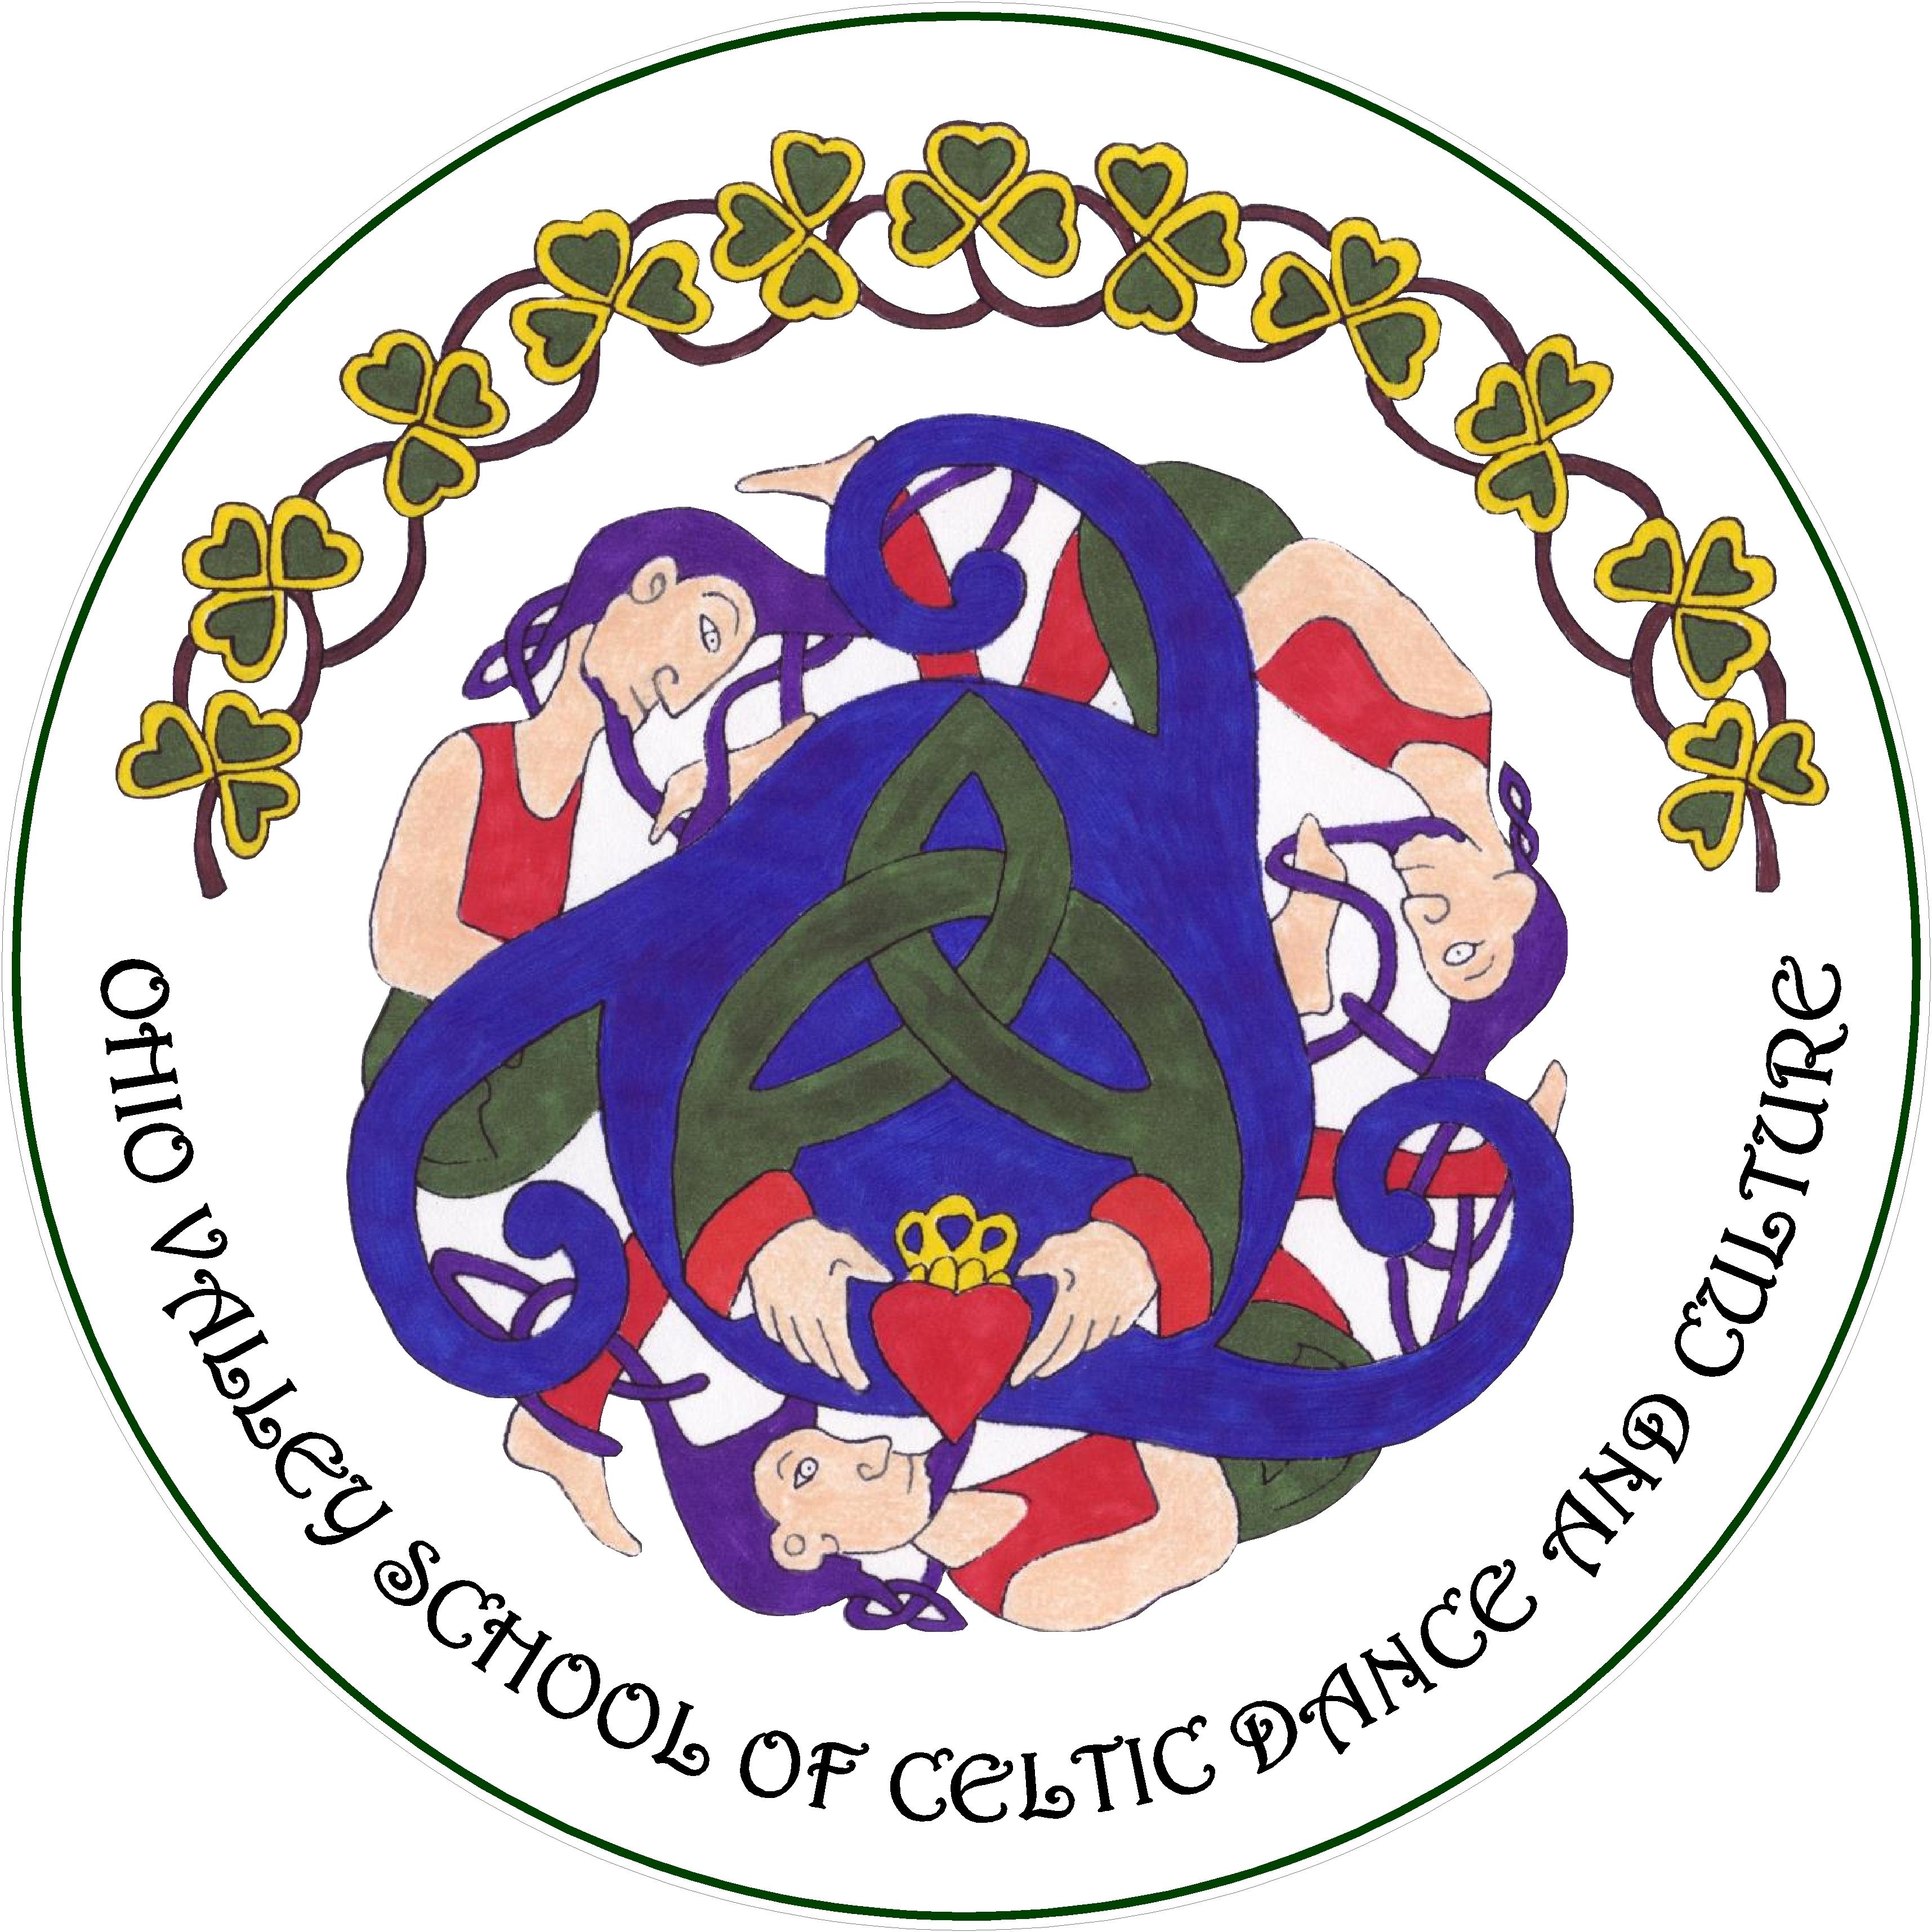 Ohio Valley School of Celtic Dance and Culture logo